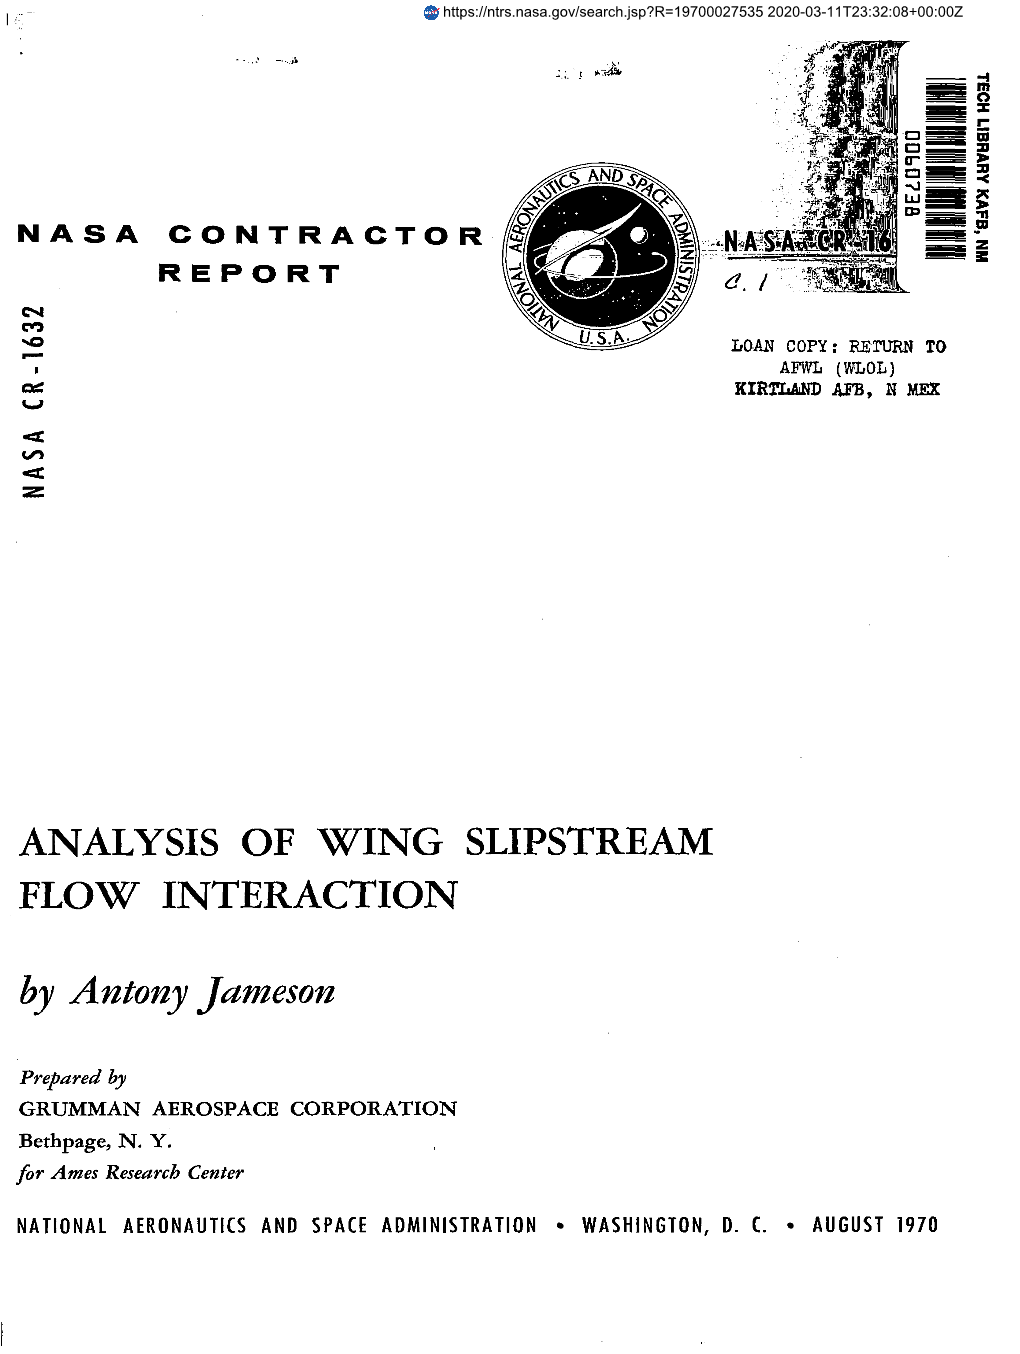 ANALYSIS of WING SLIPSTREAM FLOW INTERACTION by Antony Janzesoa